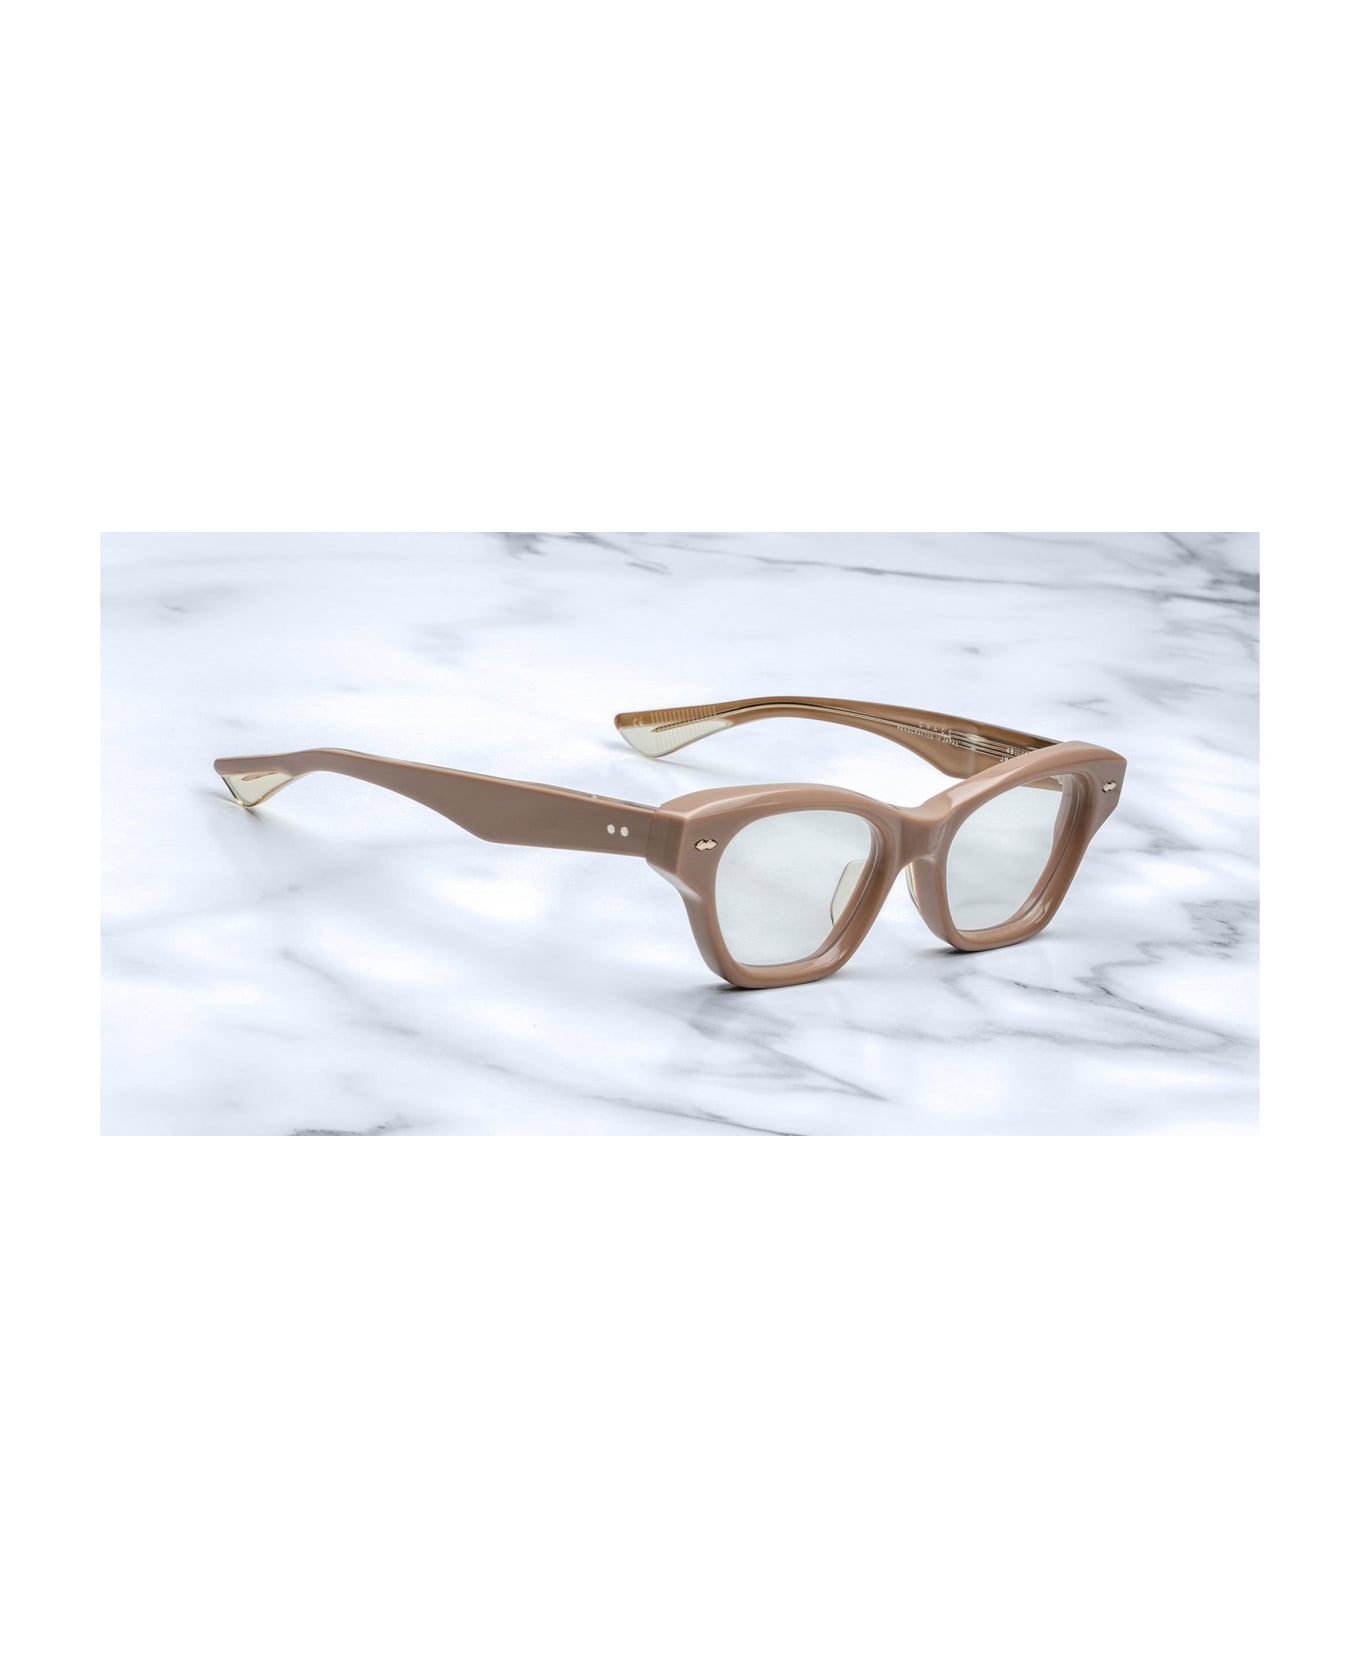 Jacques Marie Mage Grace 2 - Porter Rx Glasses - pink/gold